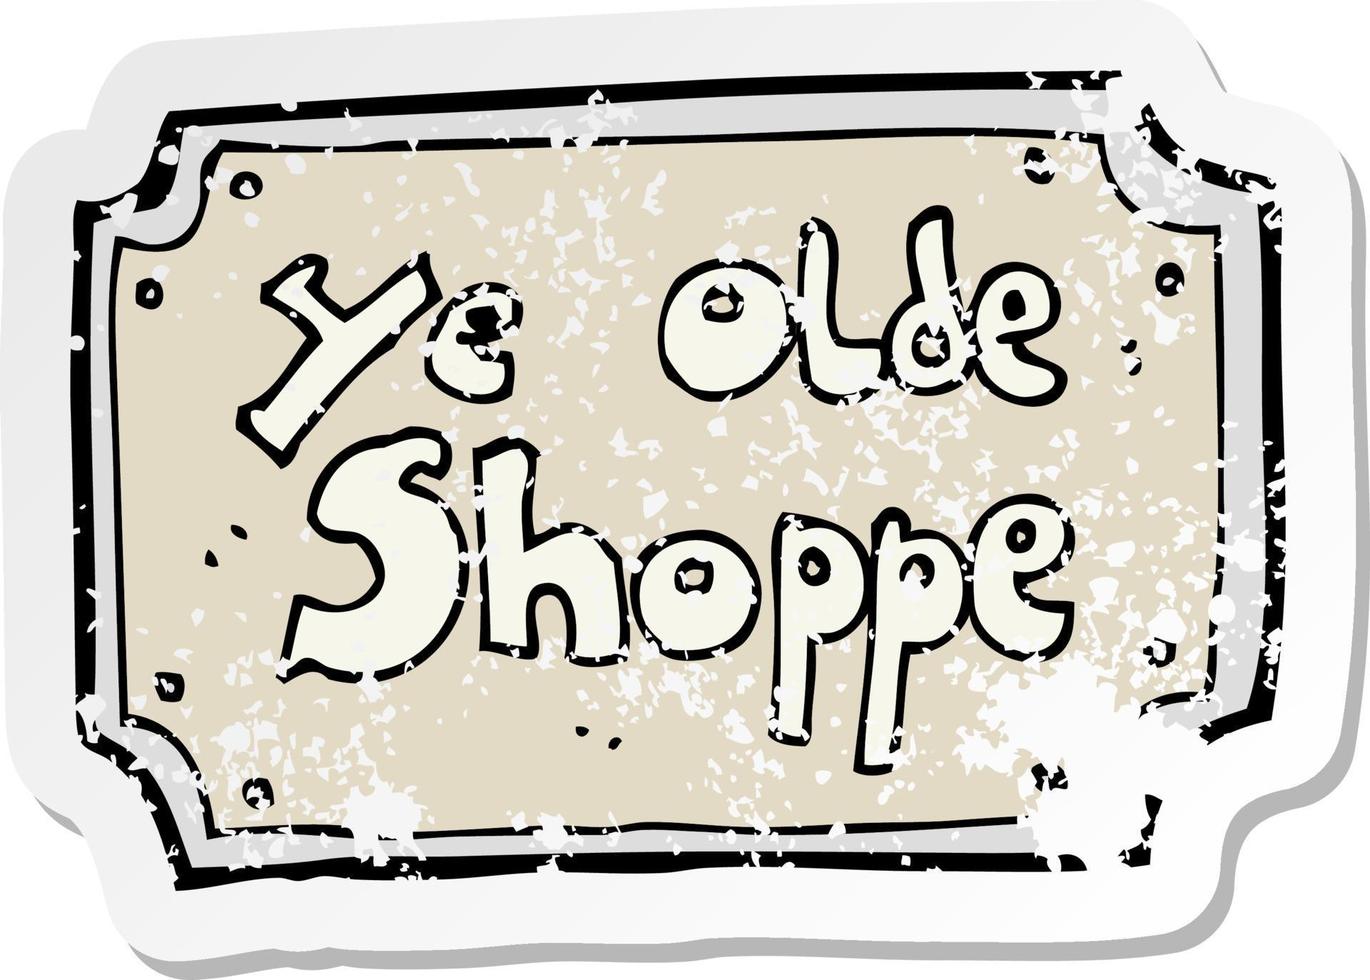 retro distressed sticker of a cartoon old fake shop sign vector